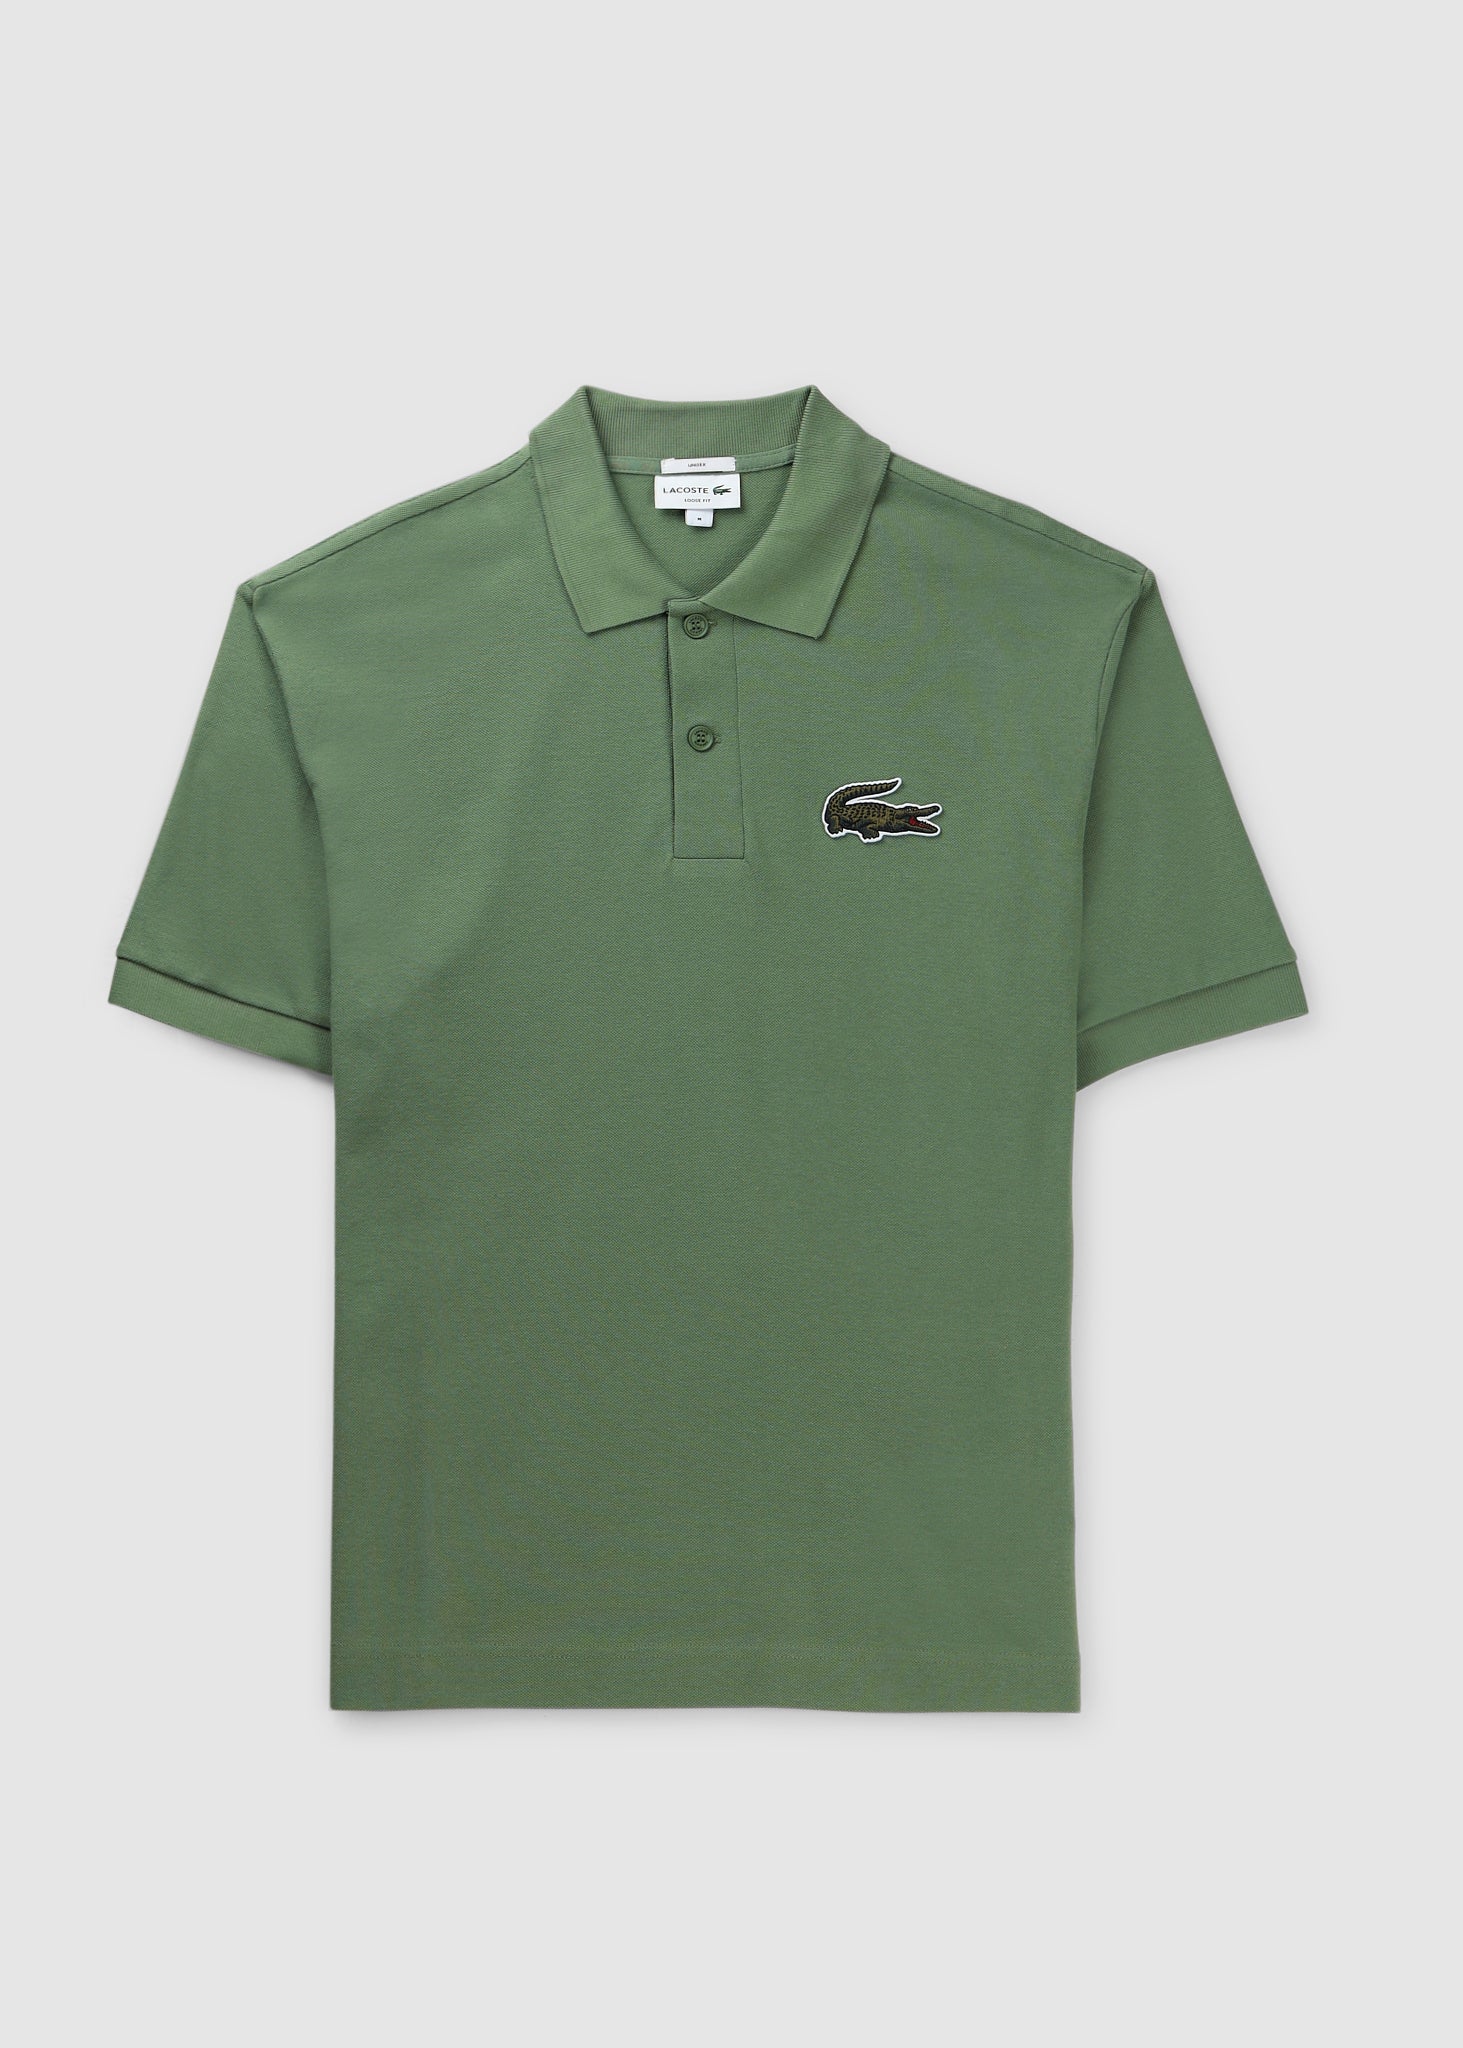 Lacoste Mens Large Croc Polo In Green - Green